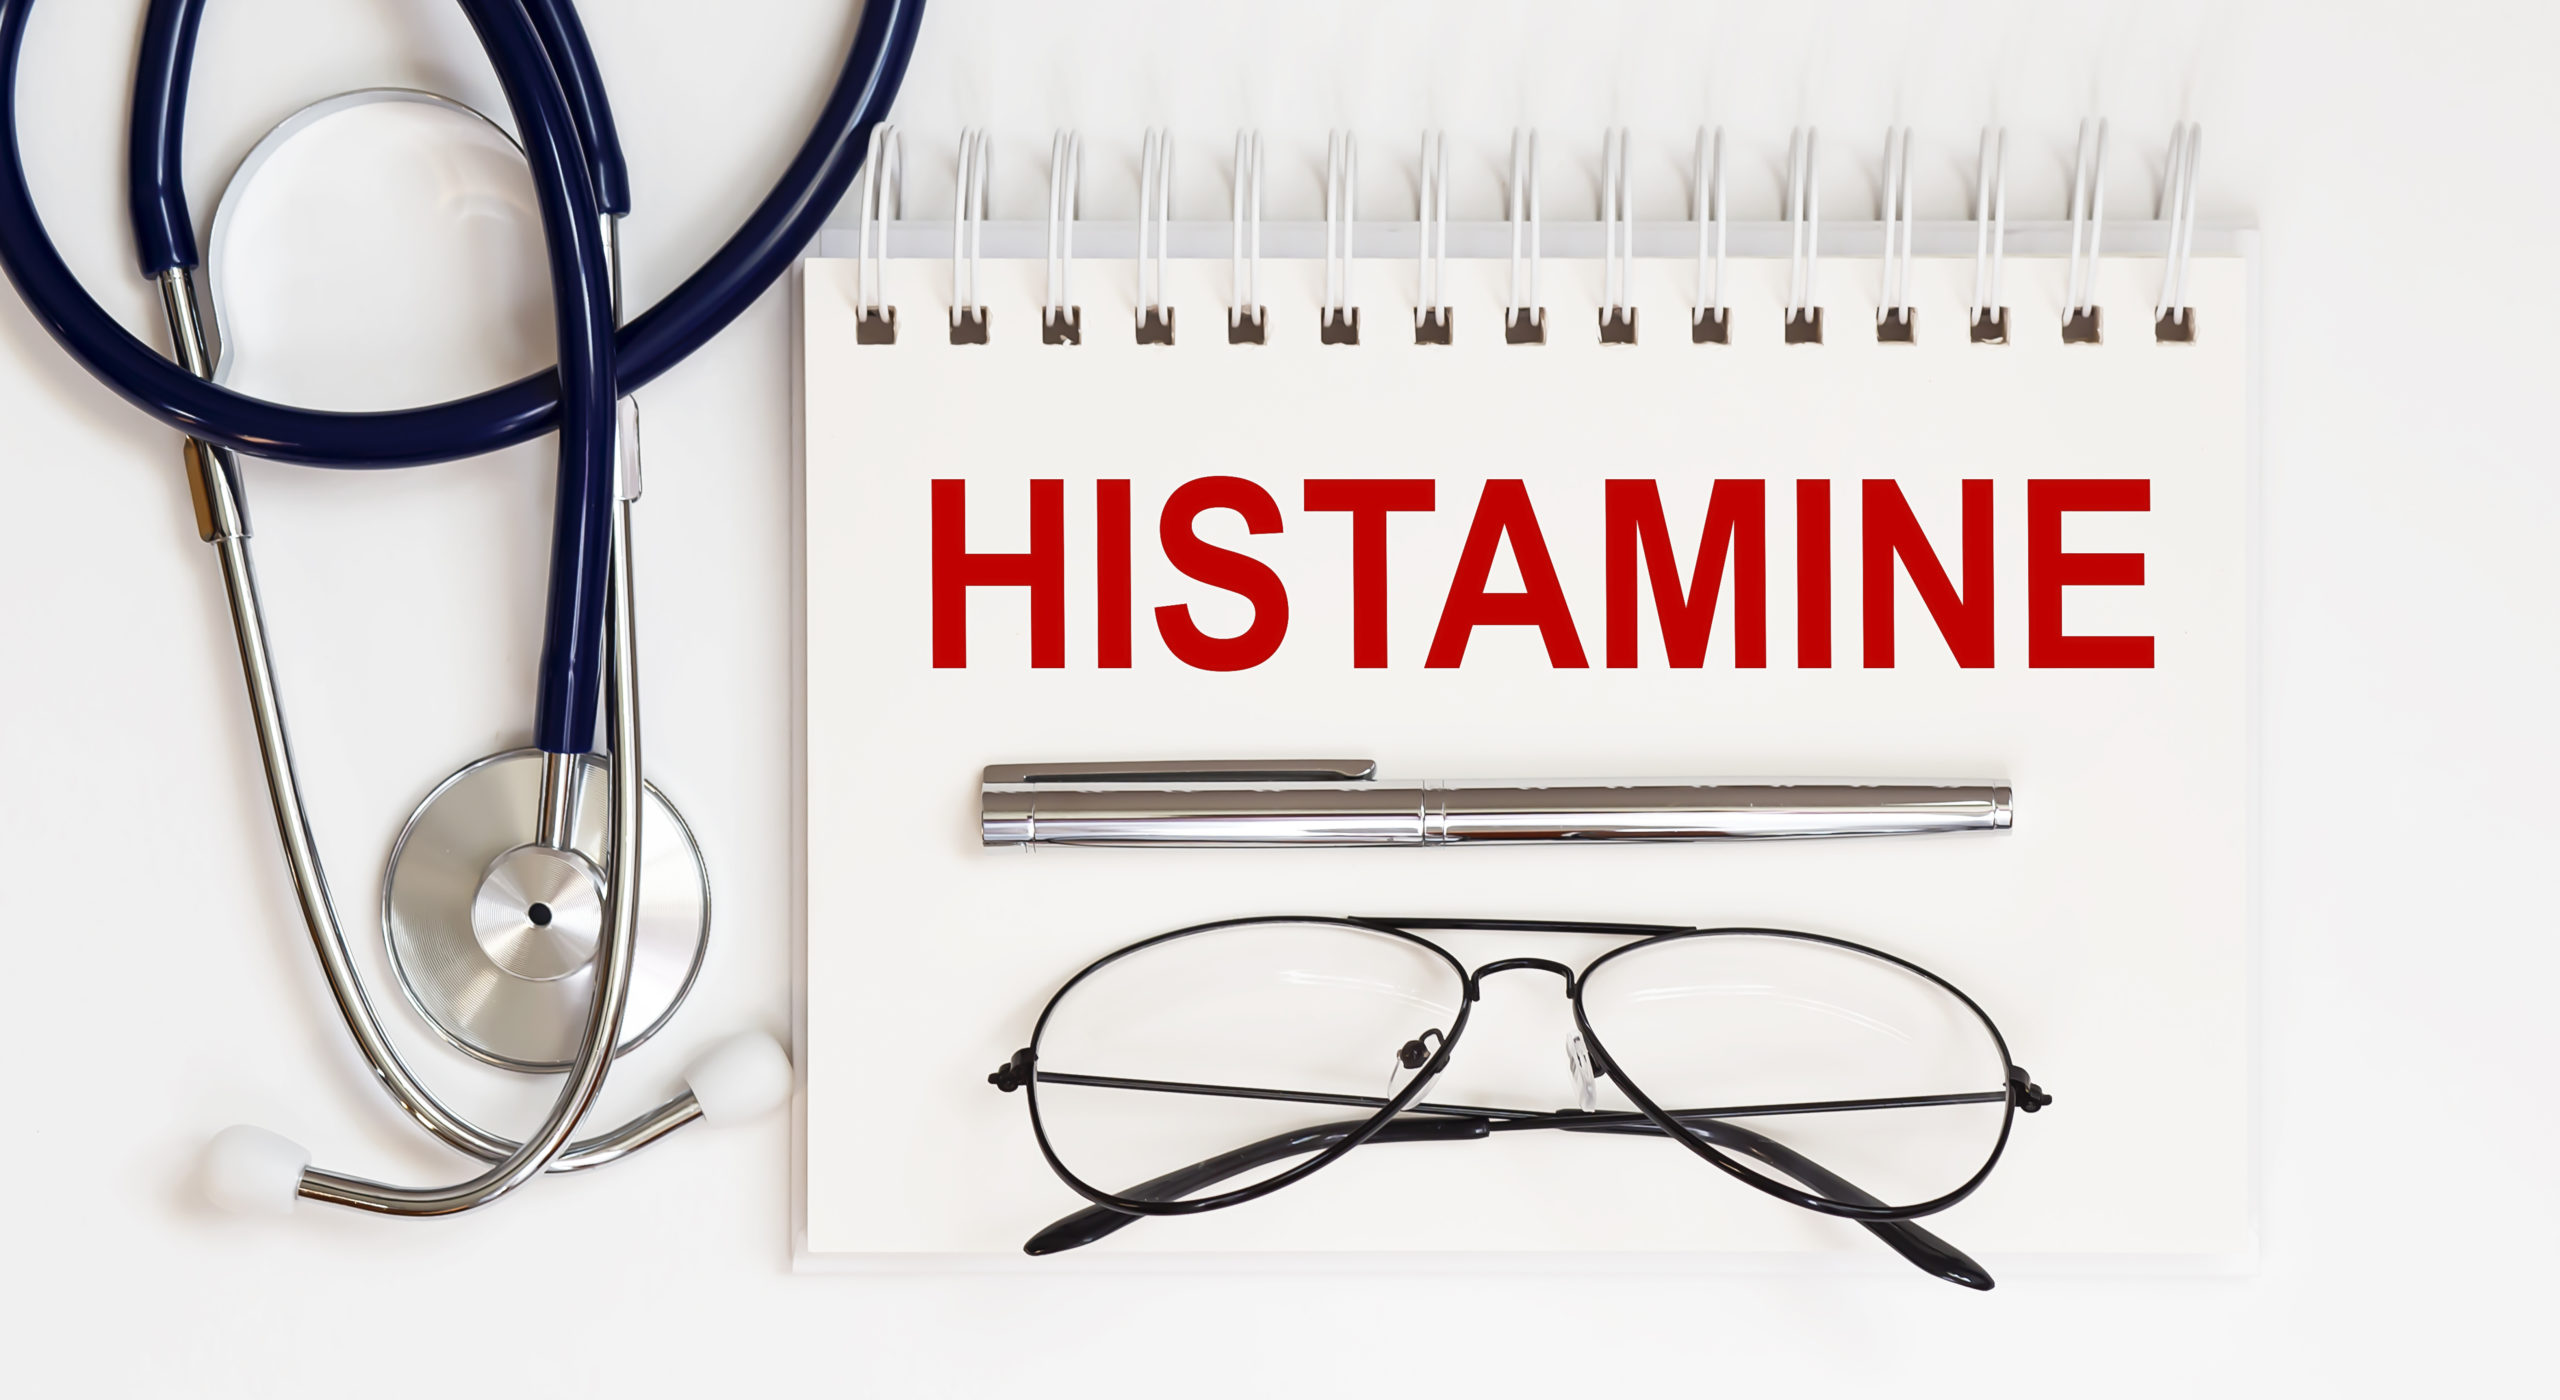 How to Diagnose Histamine Intolerance